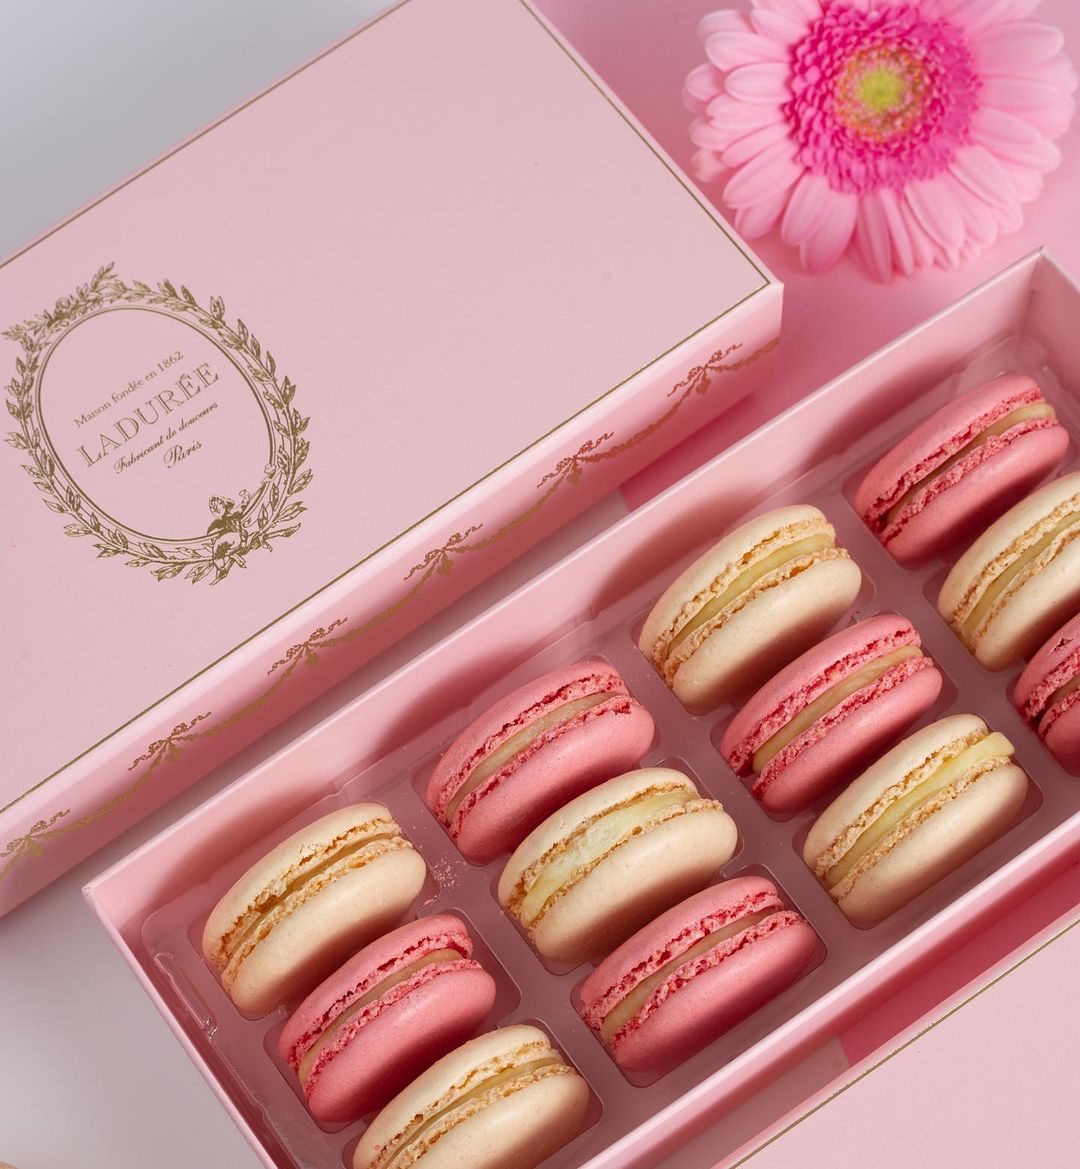 Pastel coloured macarons in pink box with a flower